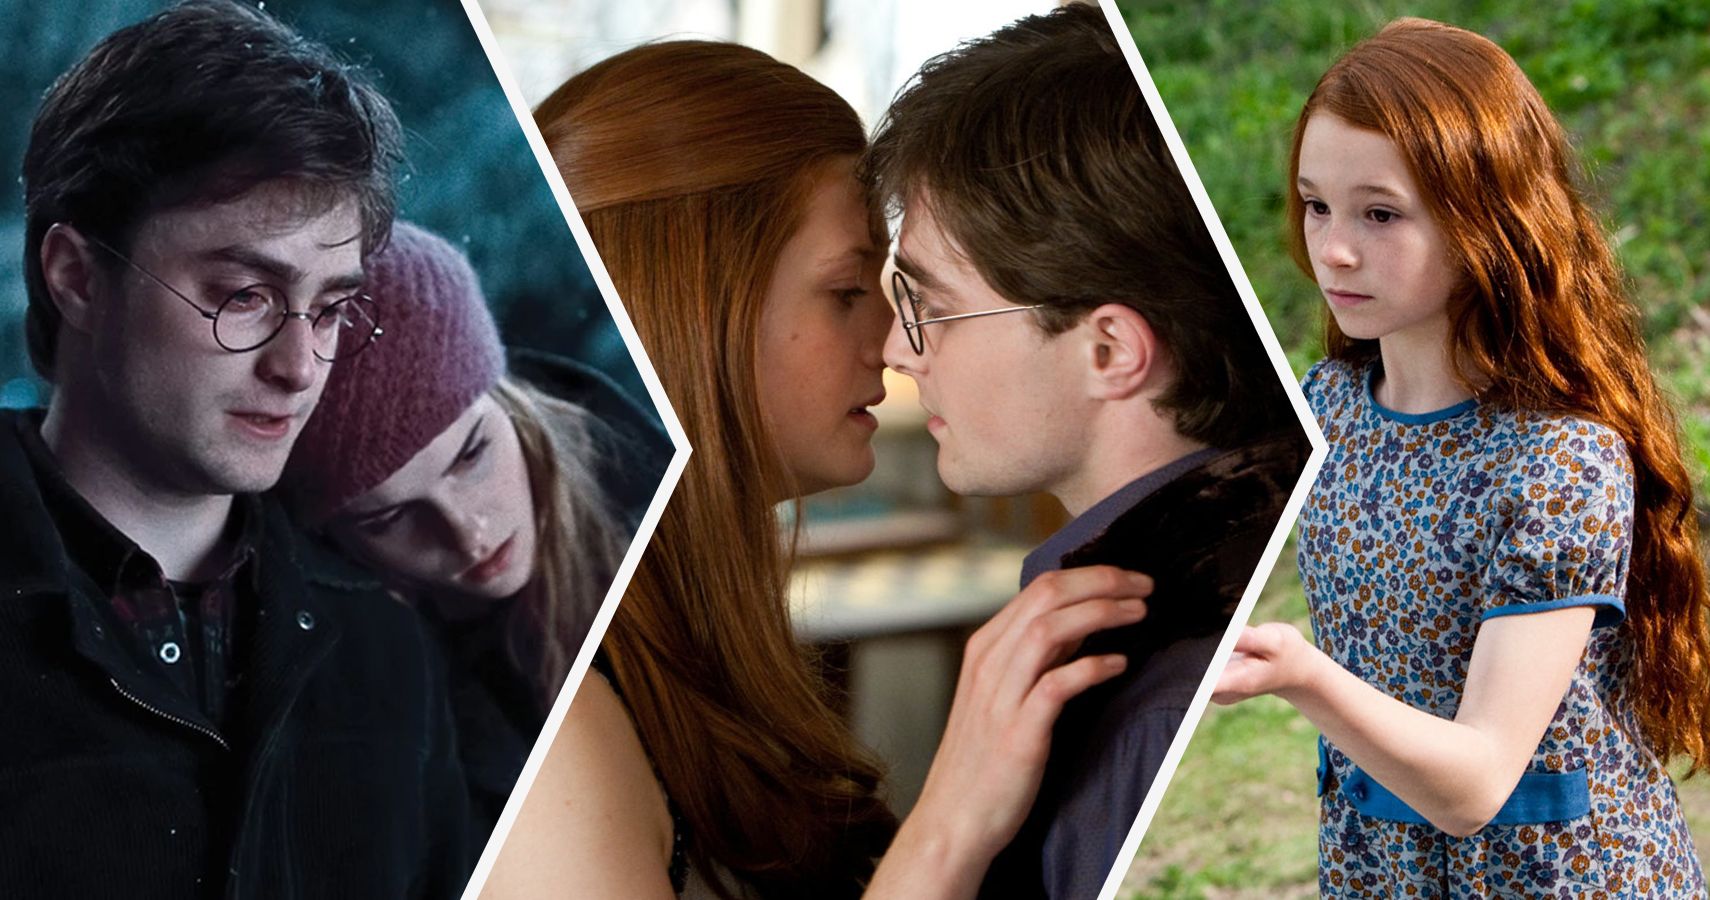 20 Things About Harry and Ginny's Relationship That Make No Sense